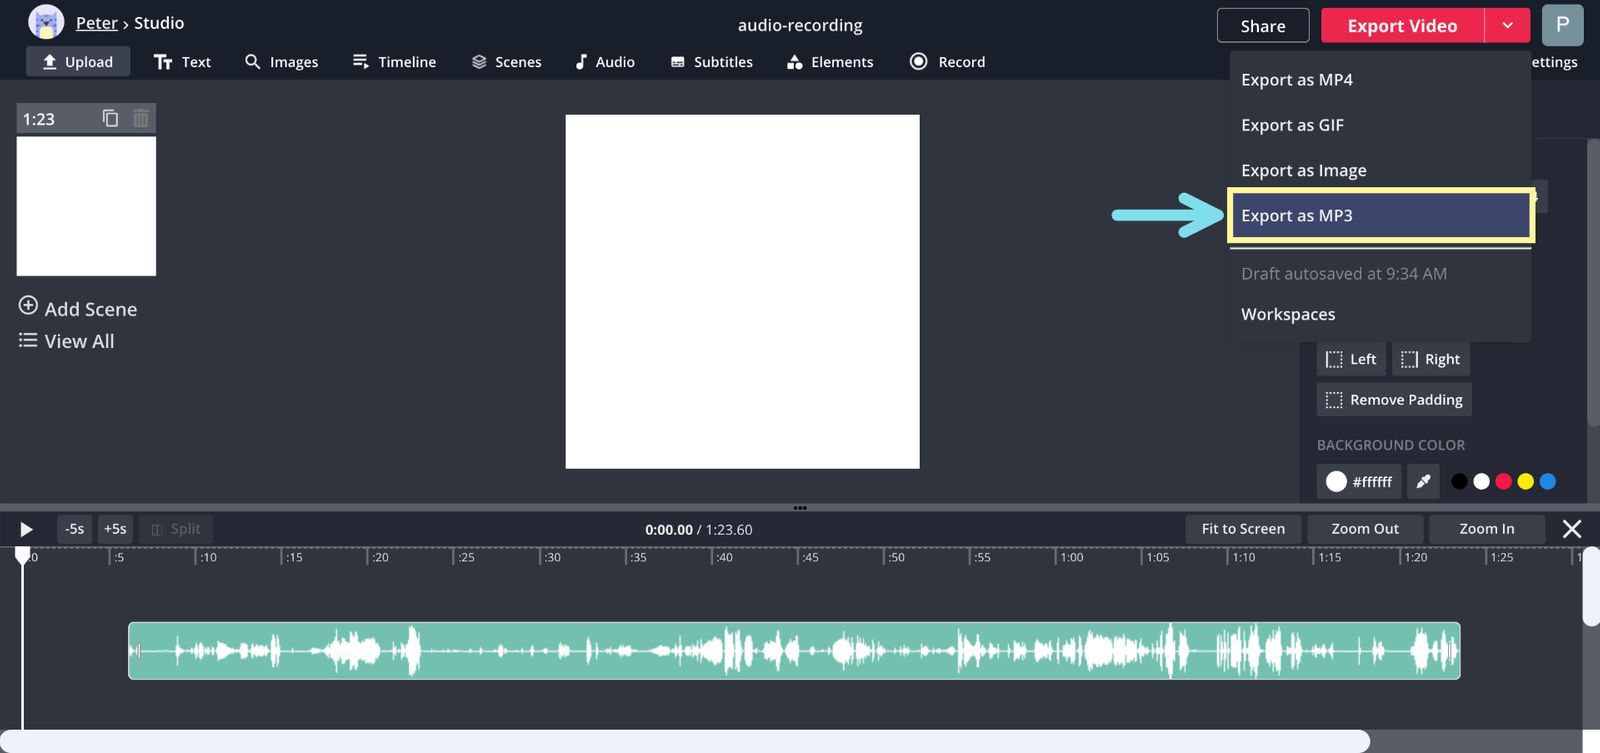 A screenshot showing how to export an audio file from the Kapwing Studio. 